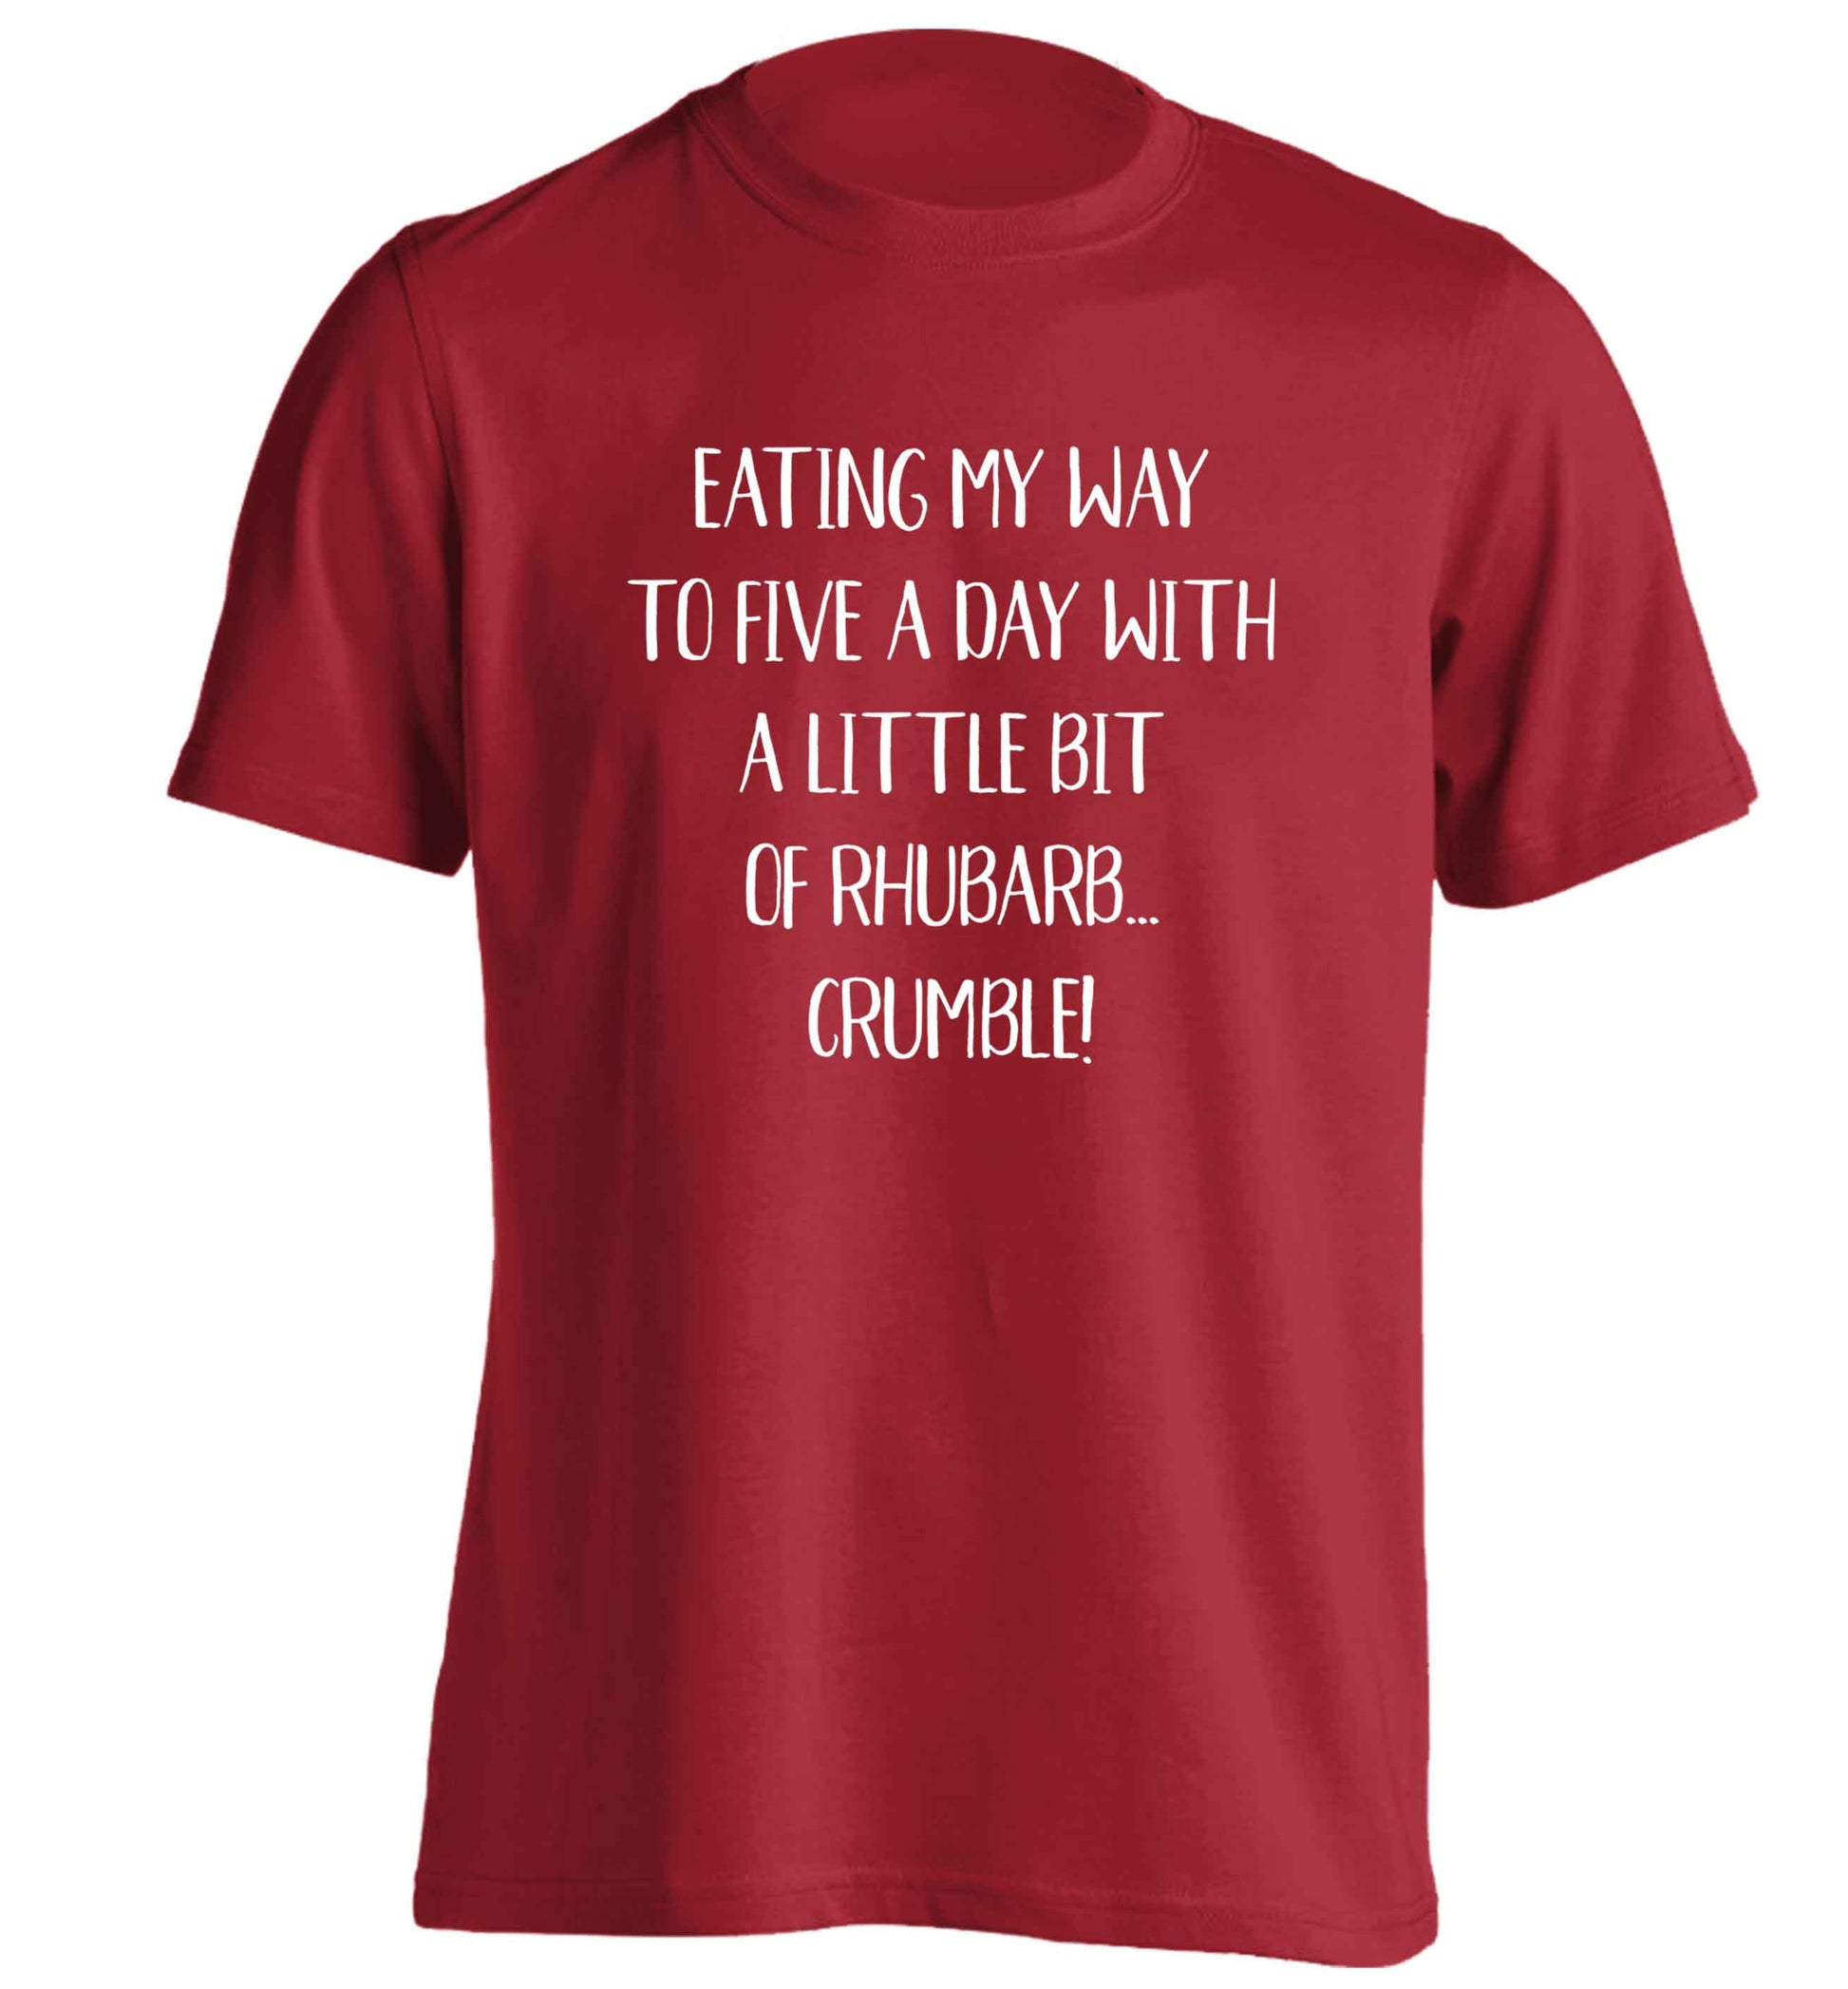 Eating my way to five a day with a little bit of rhubarb crumble adults unisex red Tshirt 2XL